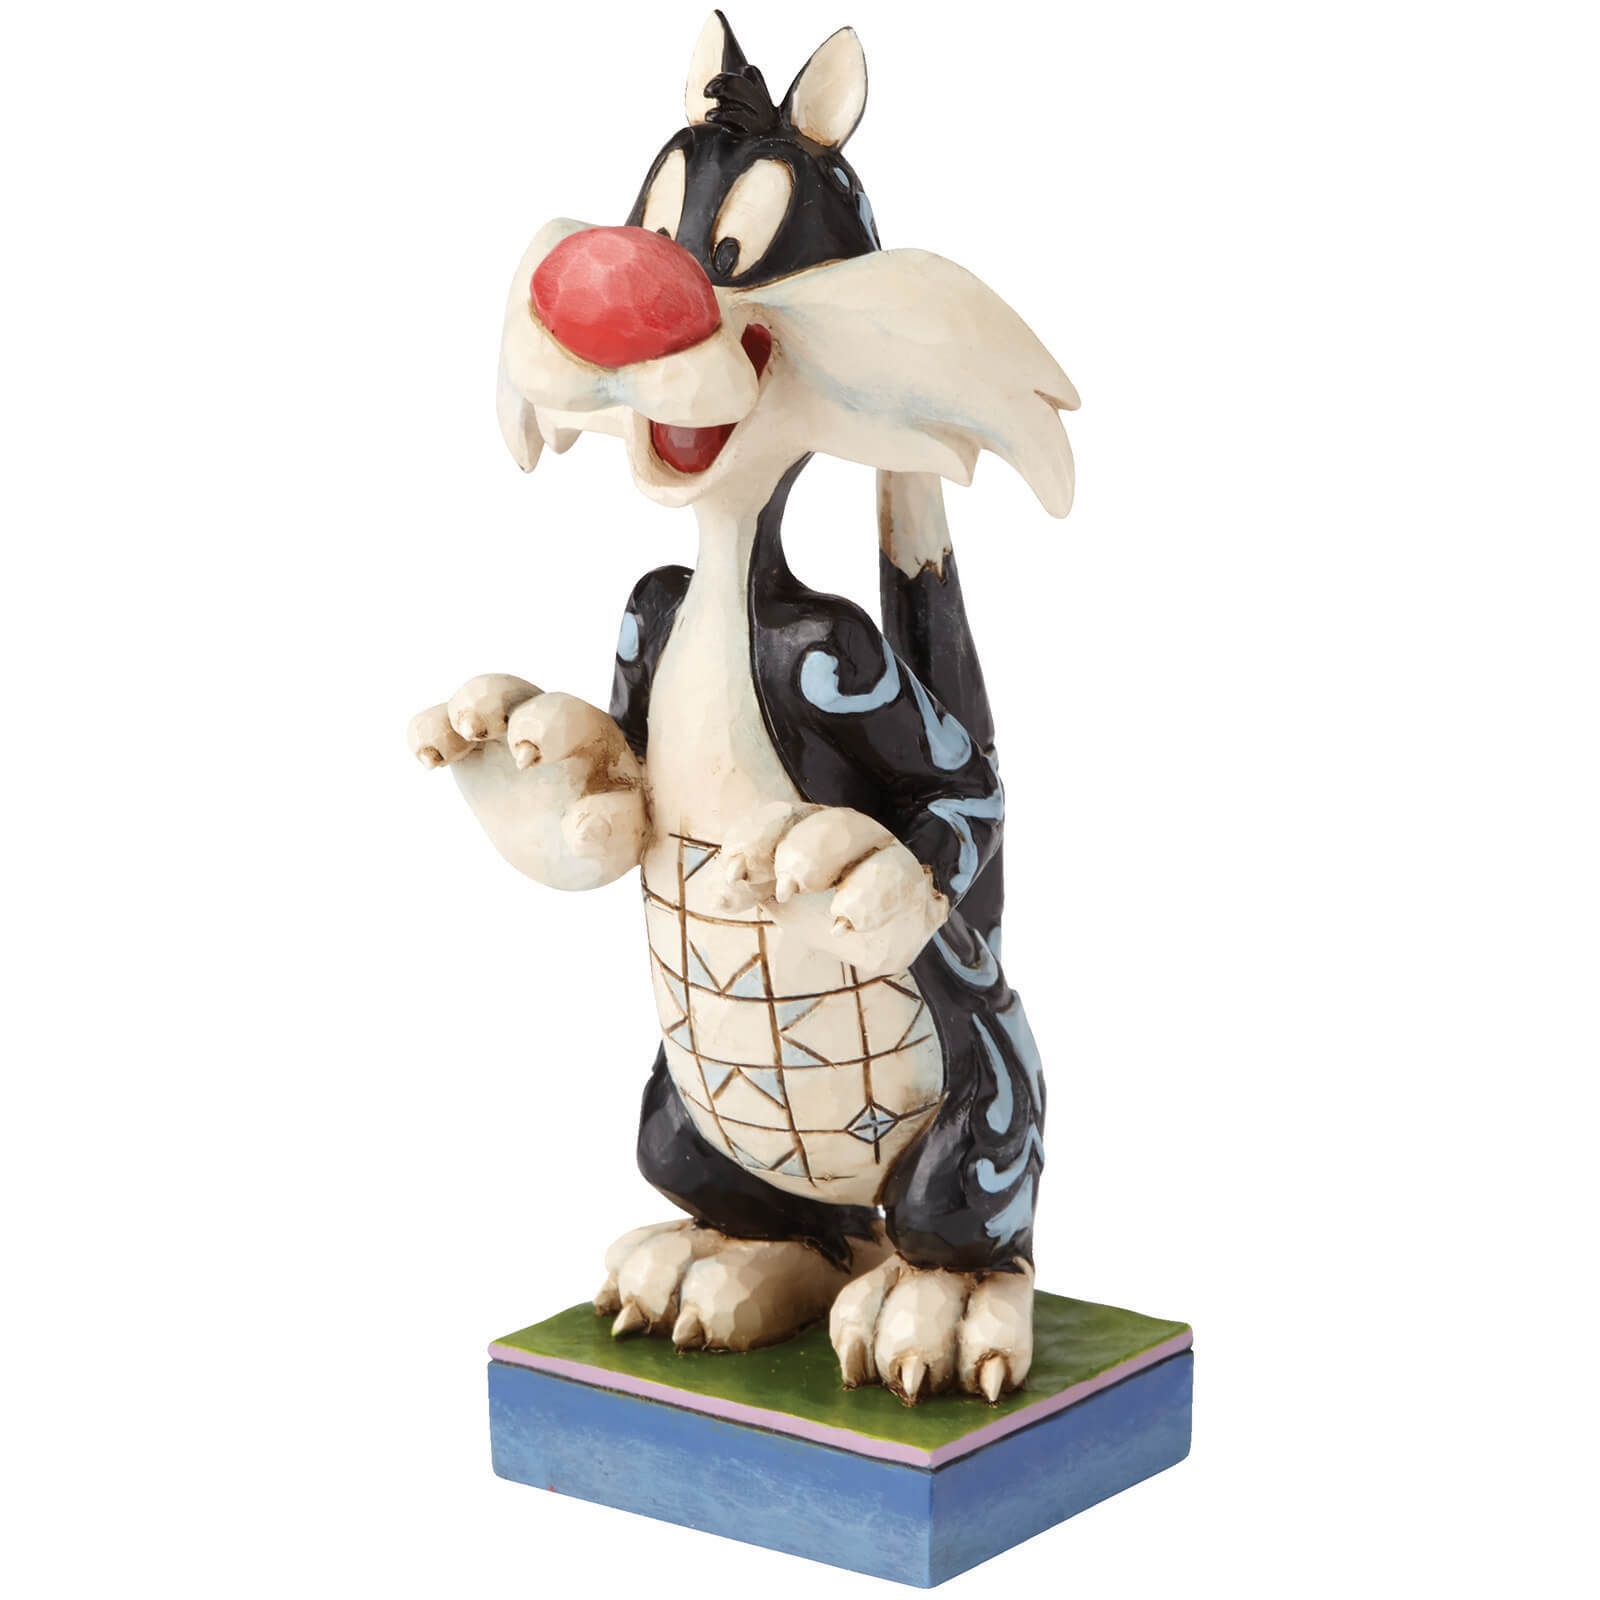 Looney Tunes by Jim Shore 'Predatory Puddy Cat' Sylvester Figurine